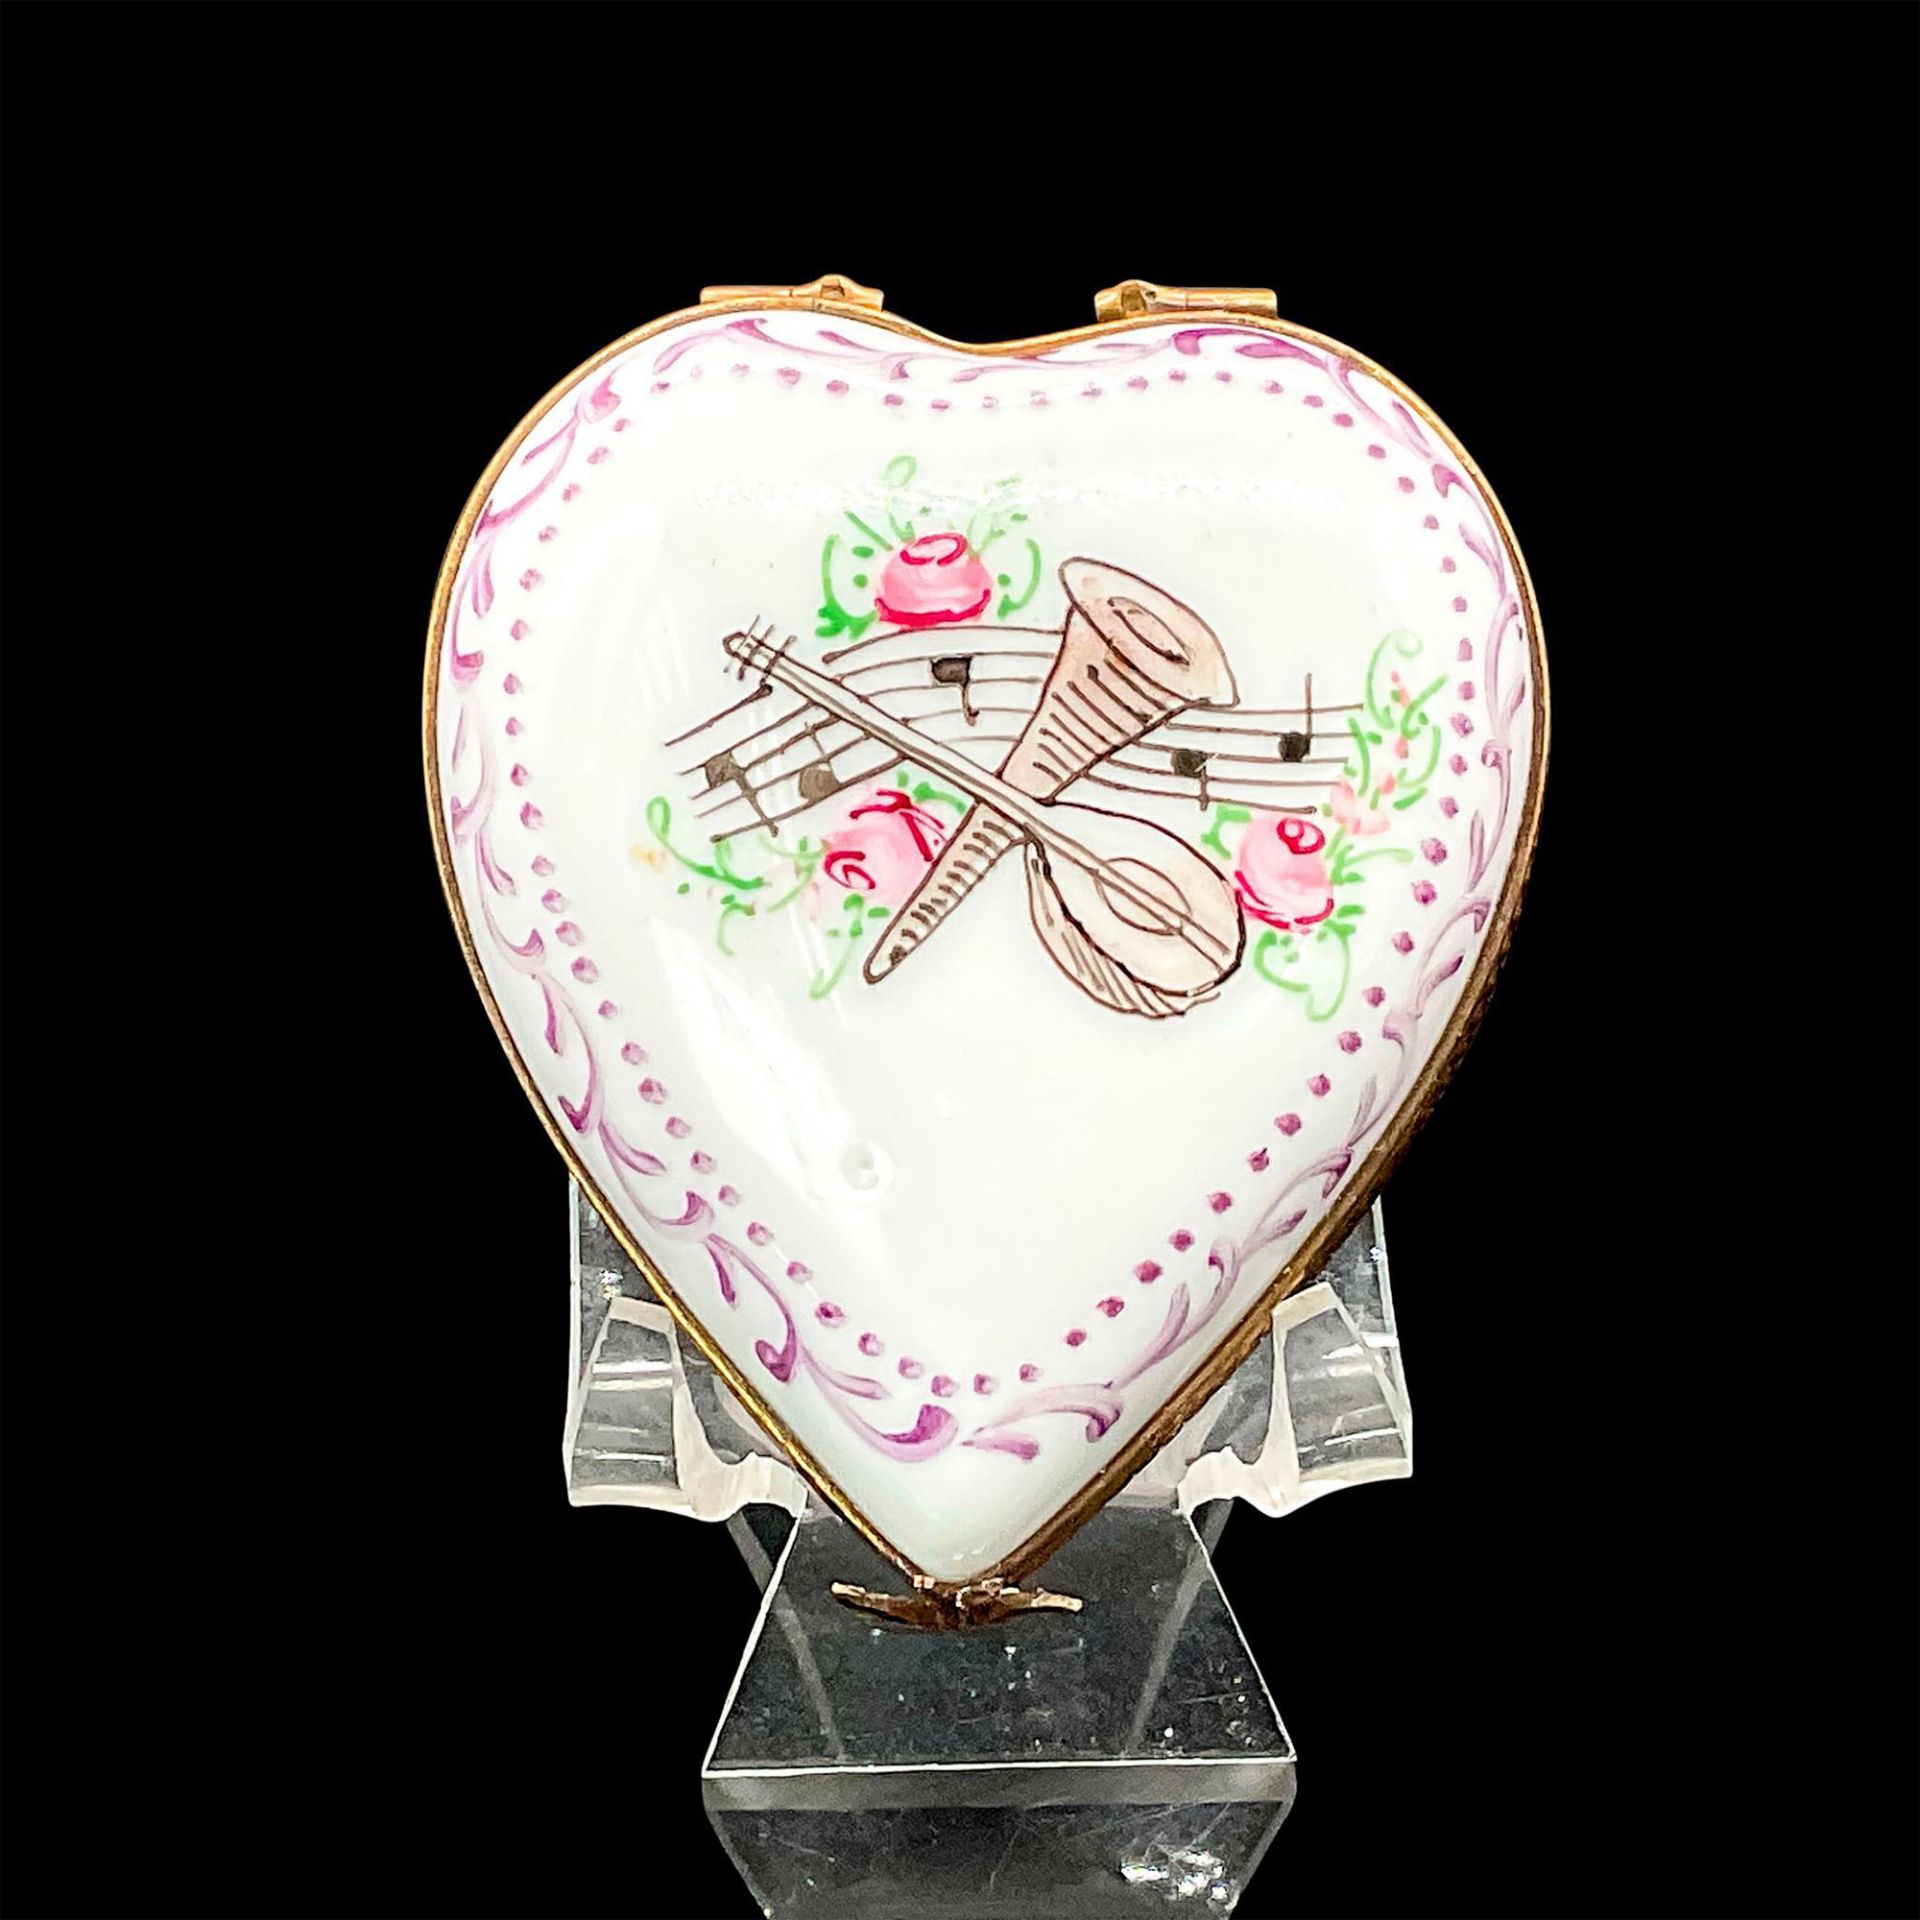 Jacques French Home Limoges Porcelain Heart Box